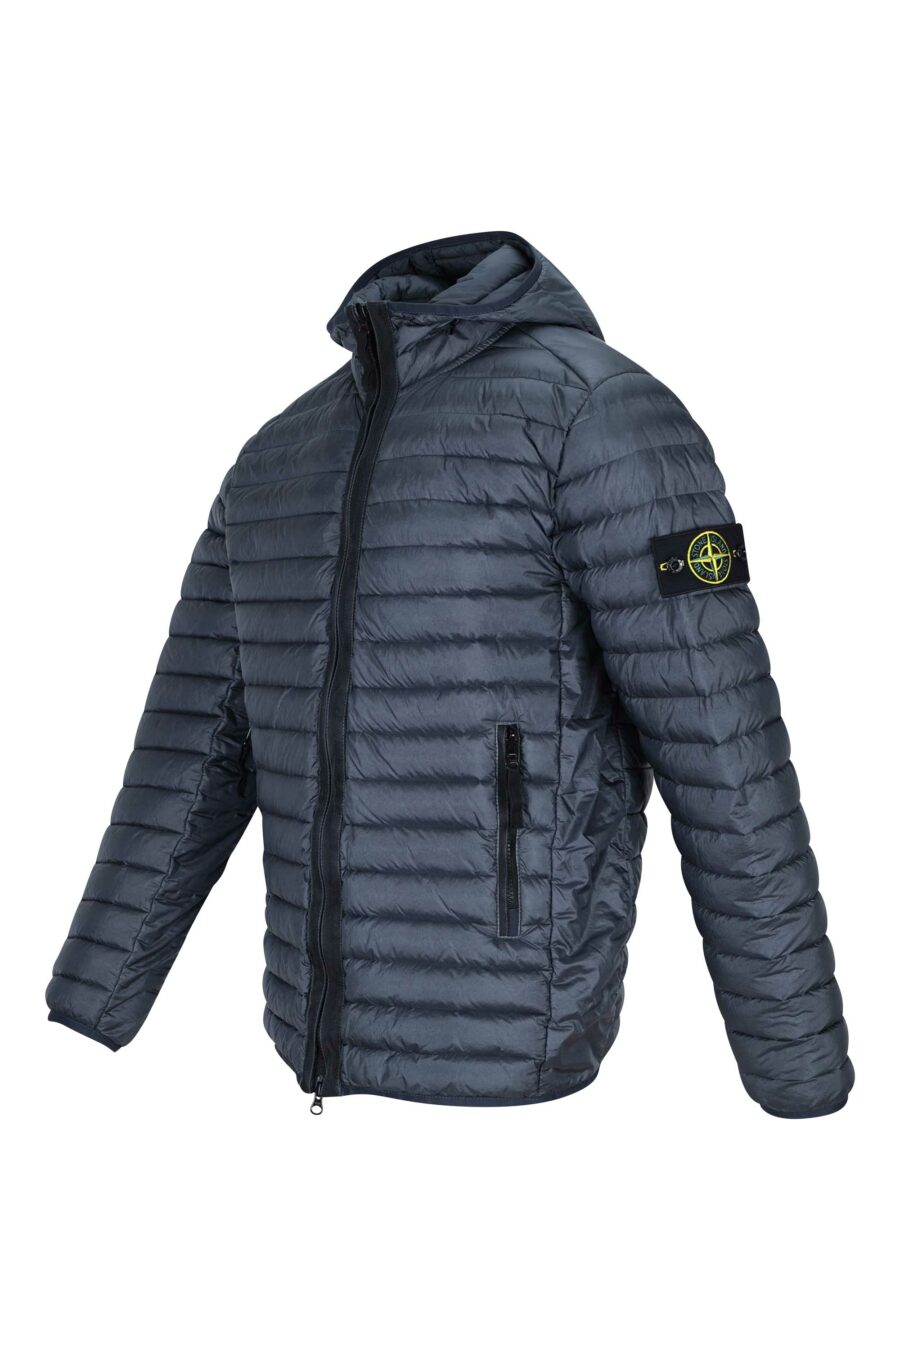 Grey hooded jacket with side logo patch - 8052572723933 1